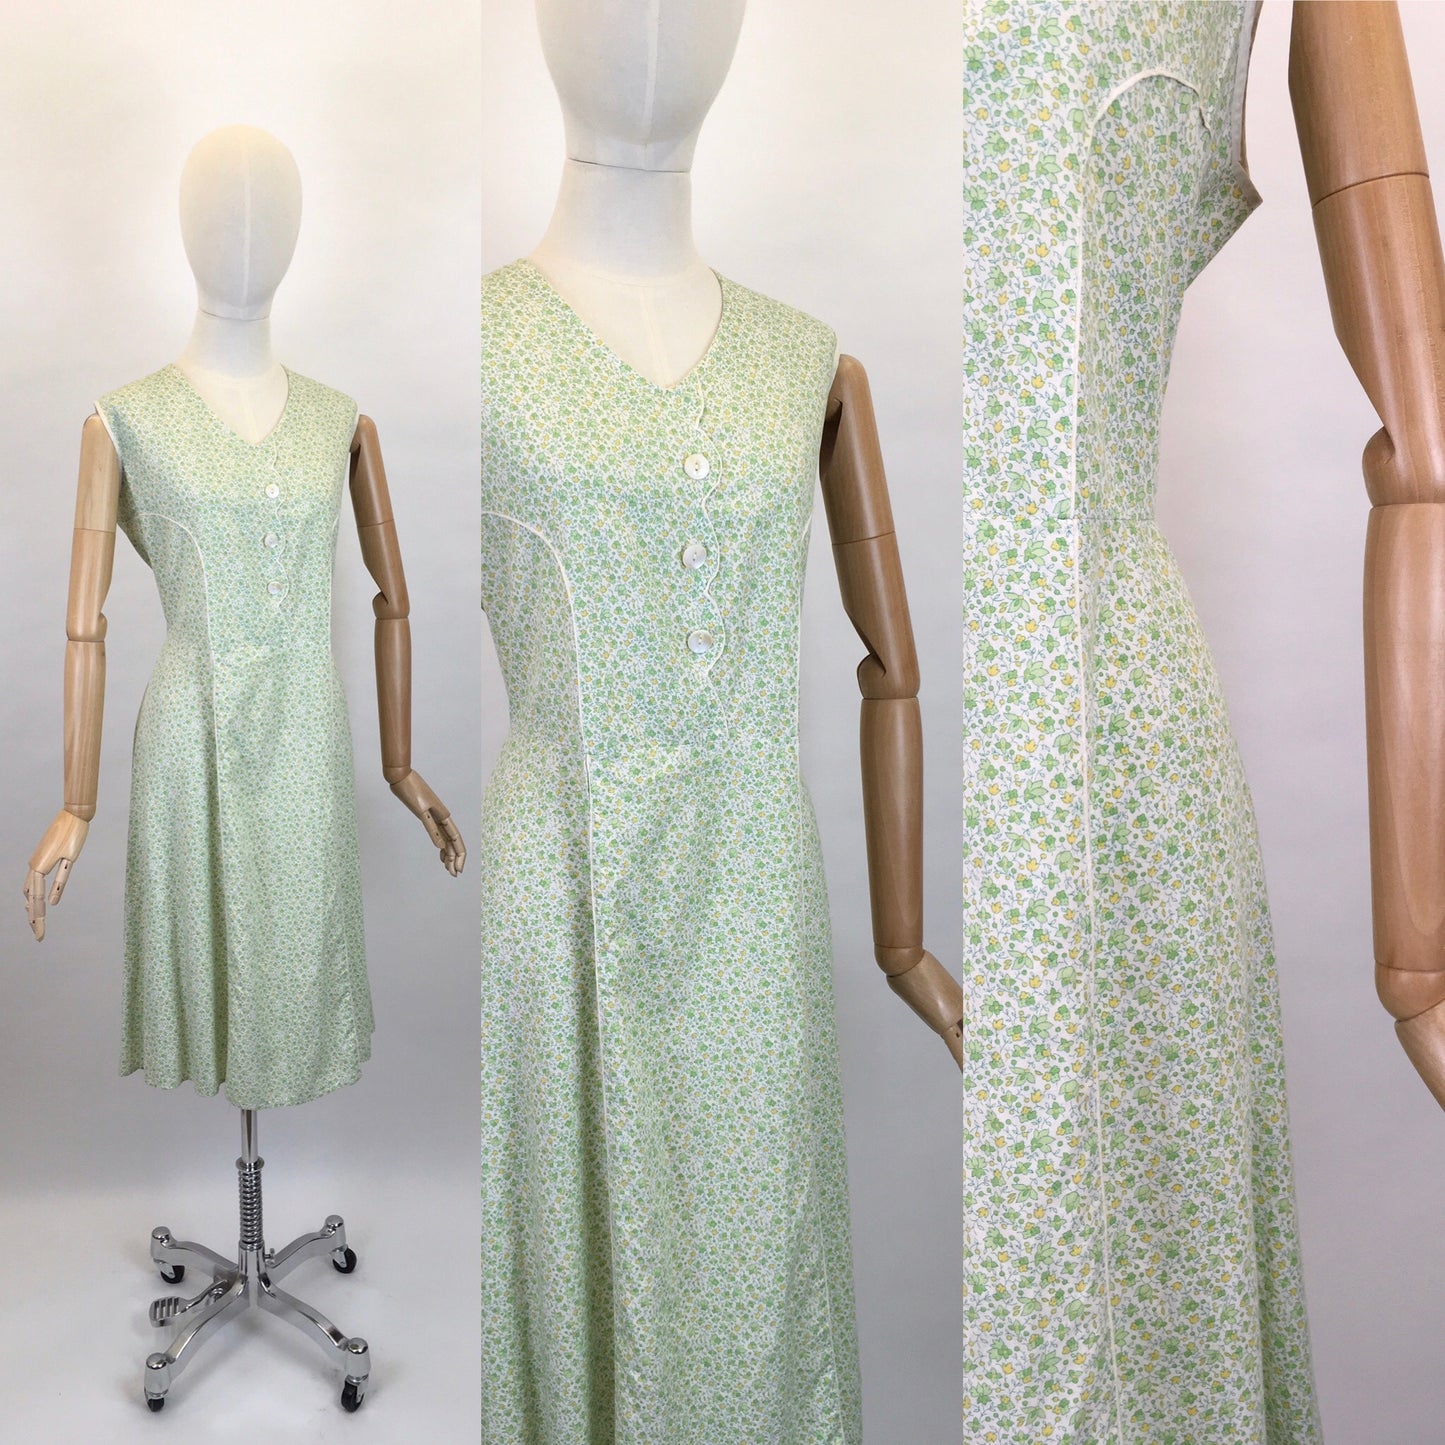 Original 1930s Cotton Day Dress - In a Lovely Colour Pallet of Soft greens, Buttercup Yellows and White